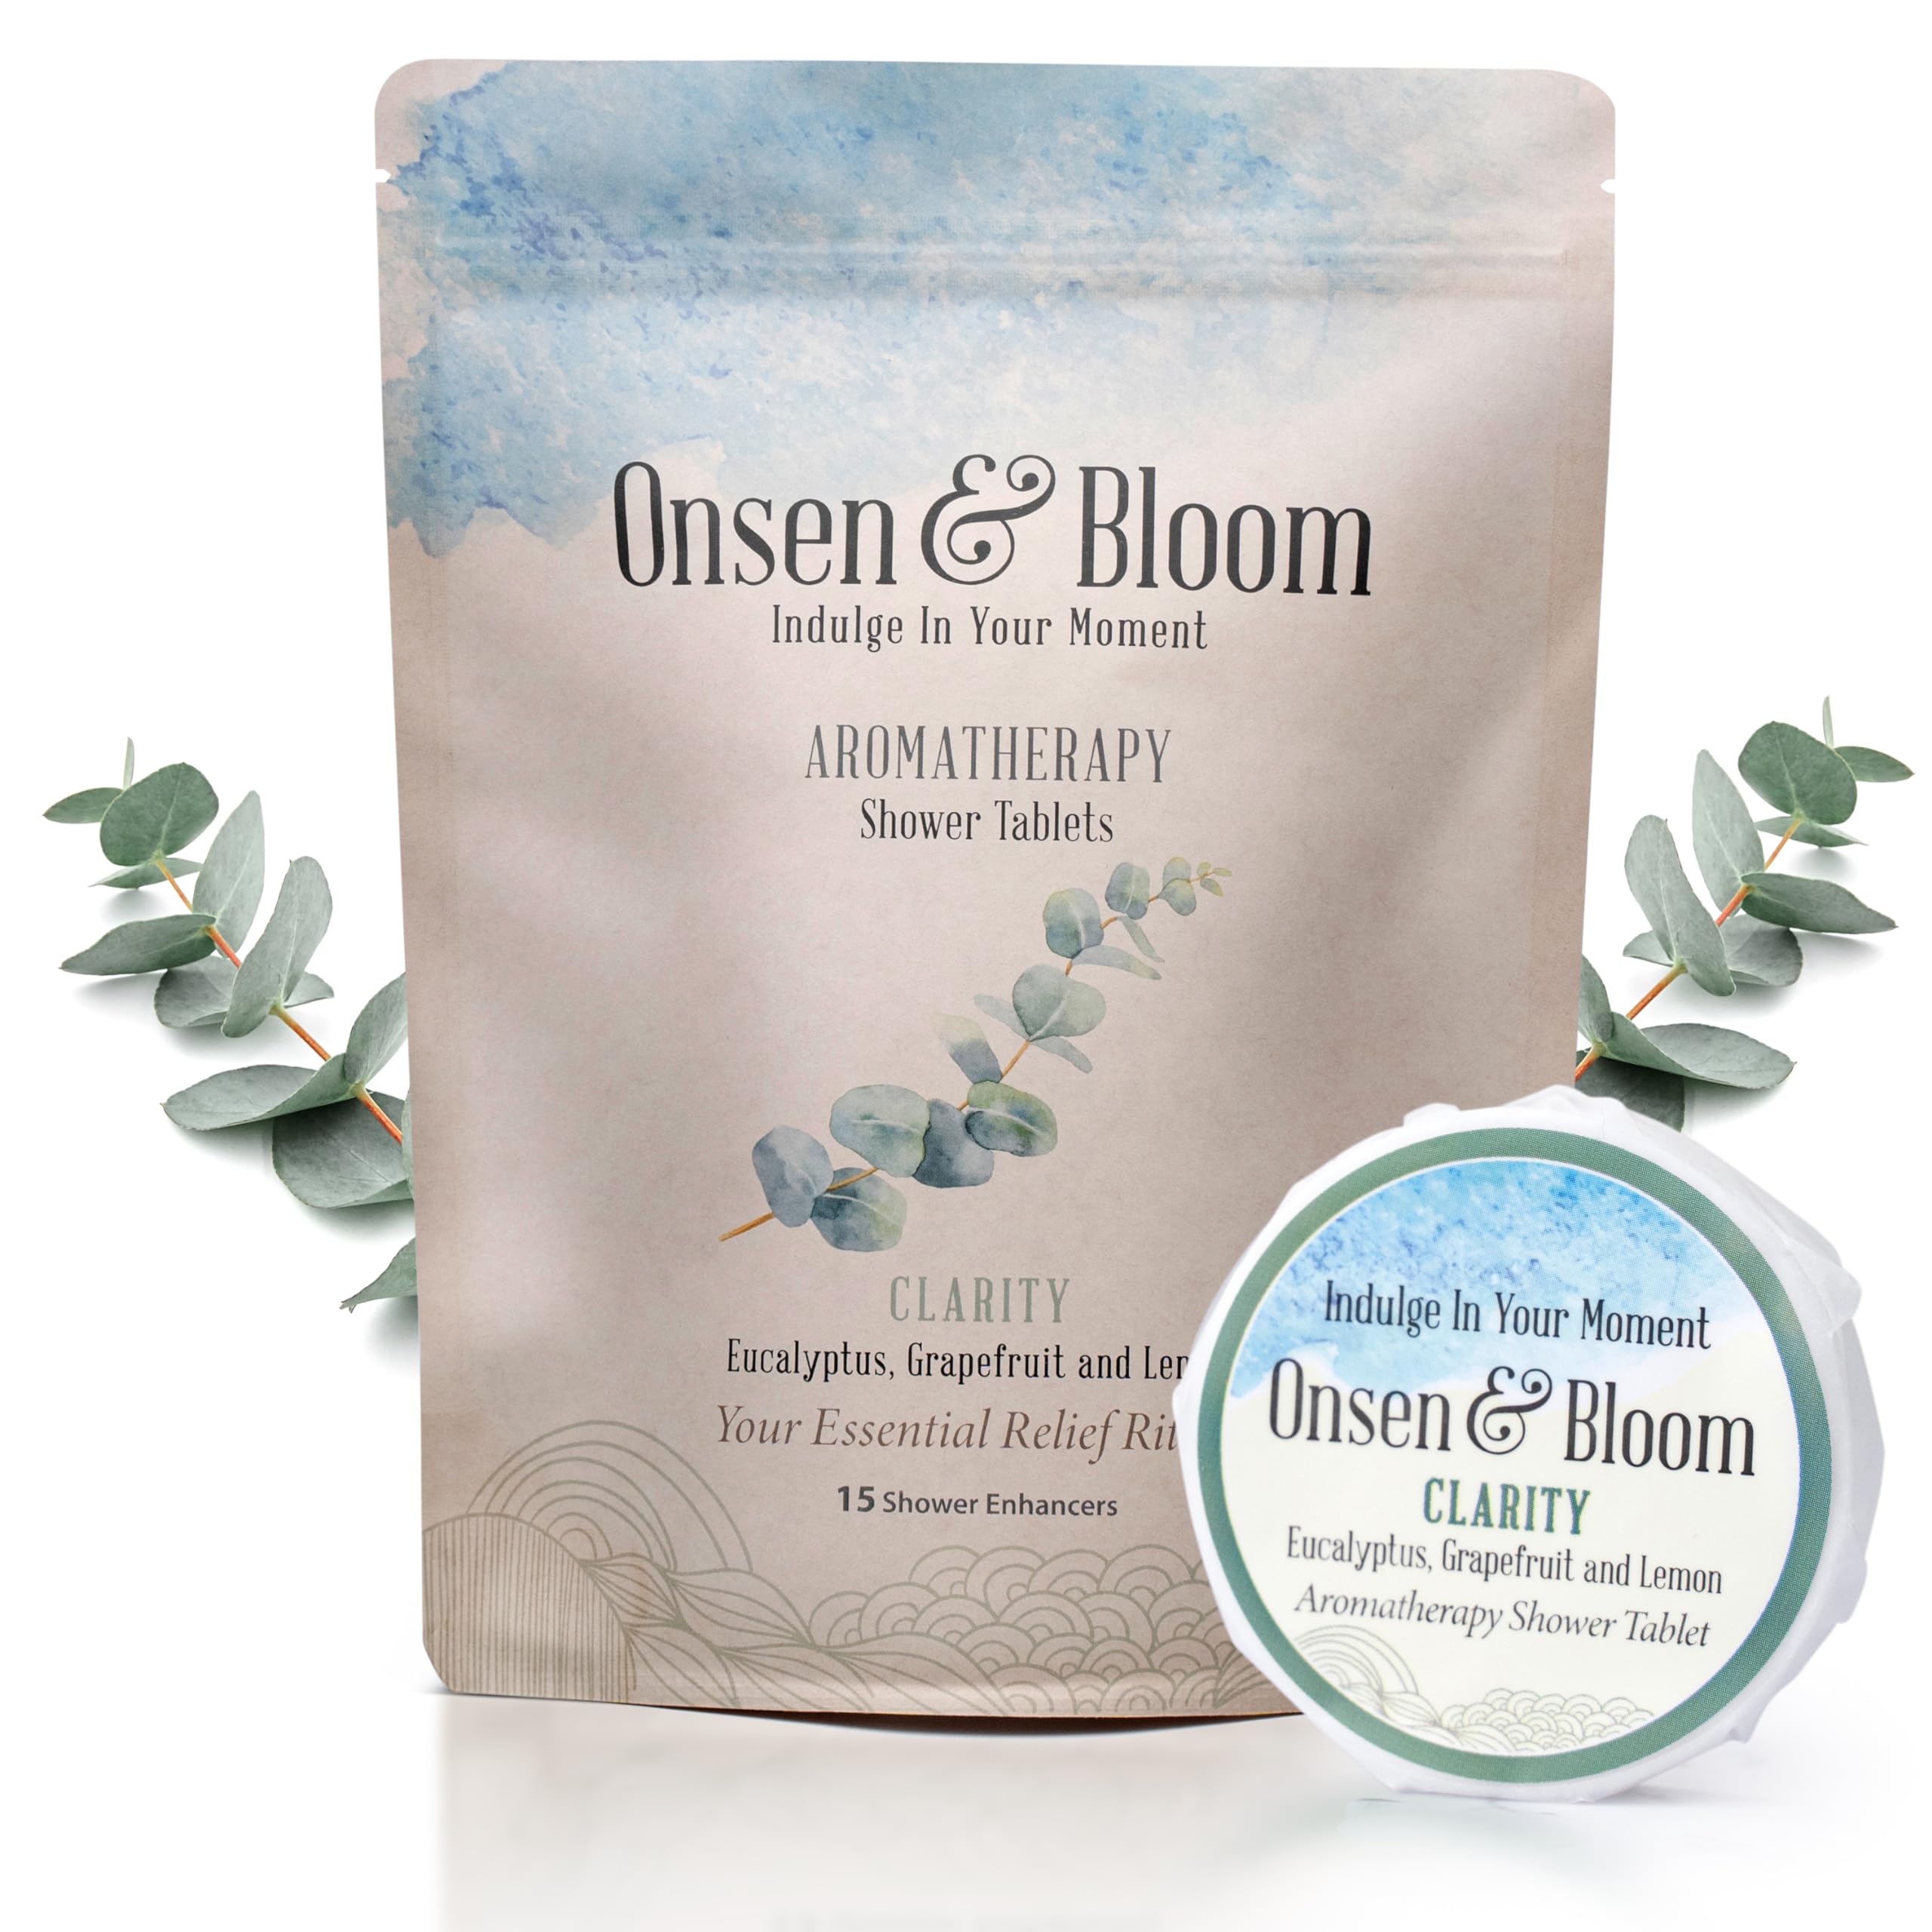 Onsen & Bloom Self Care Bundle- 15 Clarity Aromatherapy Shower Steamers with Essential Oils- 2 Pack Facial Konjac Sponge Gentle Exfoliation Duo- Shower Steamer Tray Bamboo Soap Dish with Drainage